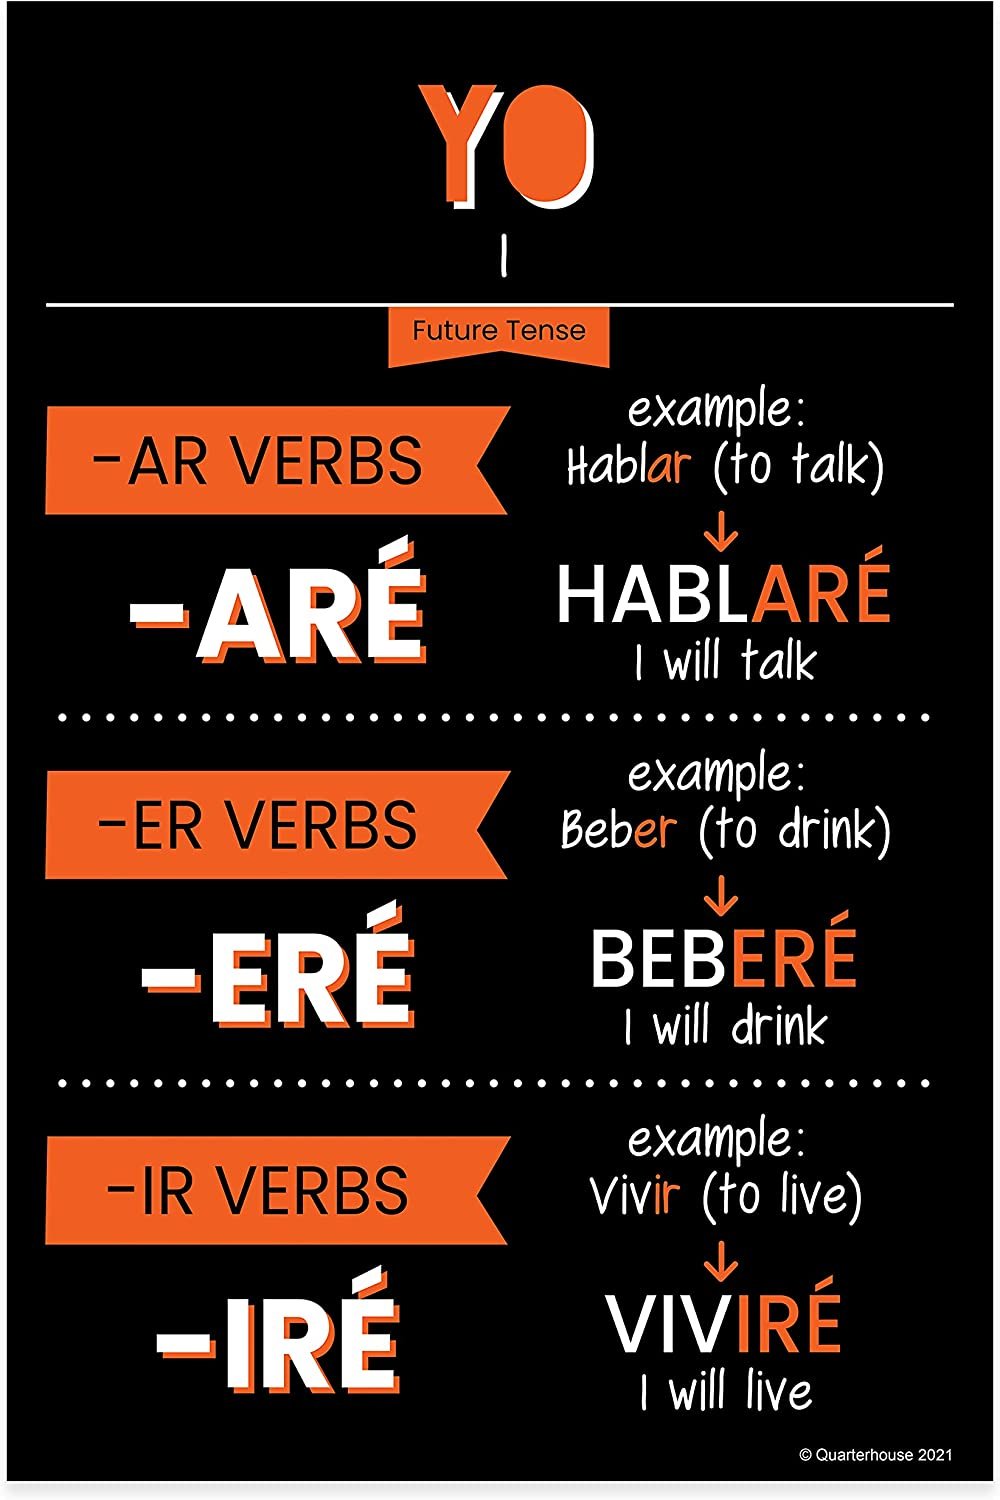 Quarterhouse Spanish Future-Tense Verbs Poster Set, Spanish - ESL Classroom Learning Materials for K-12 Students and Teachers, Set of 7, 12 x 18 Inches, Extra Durable